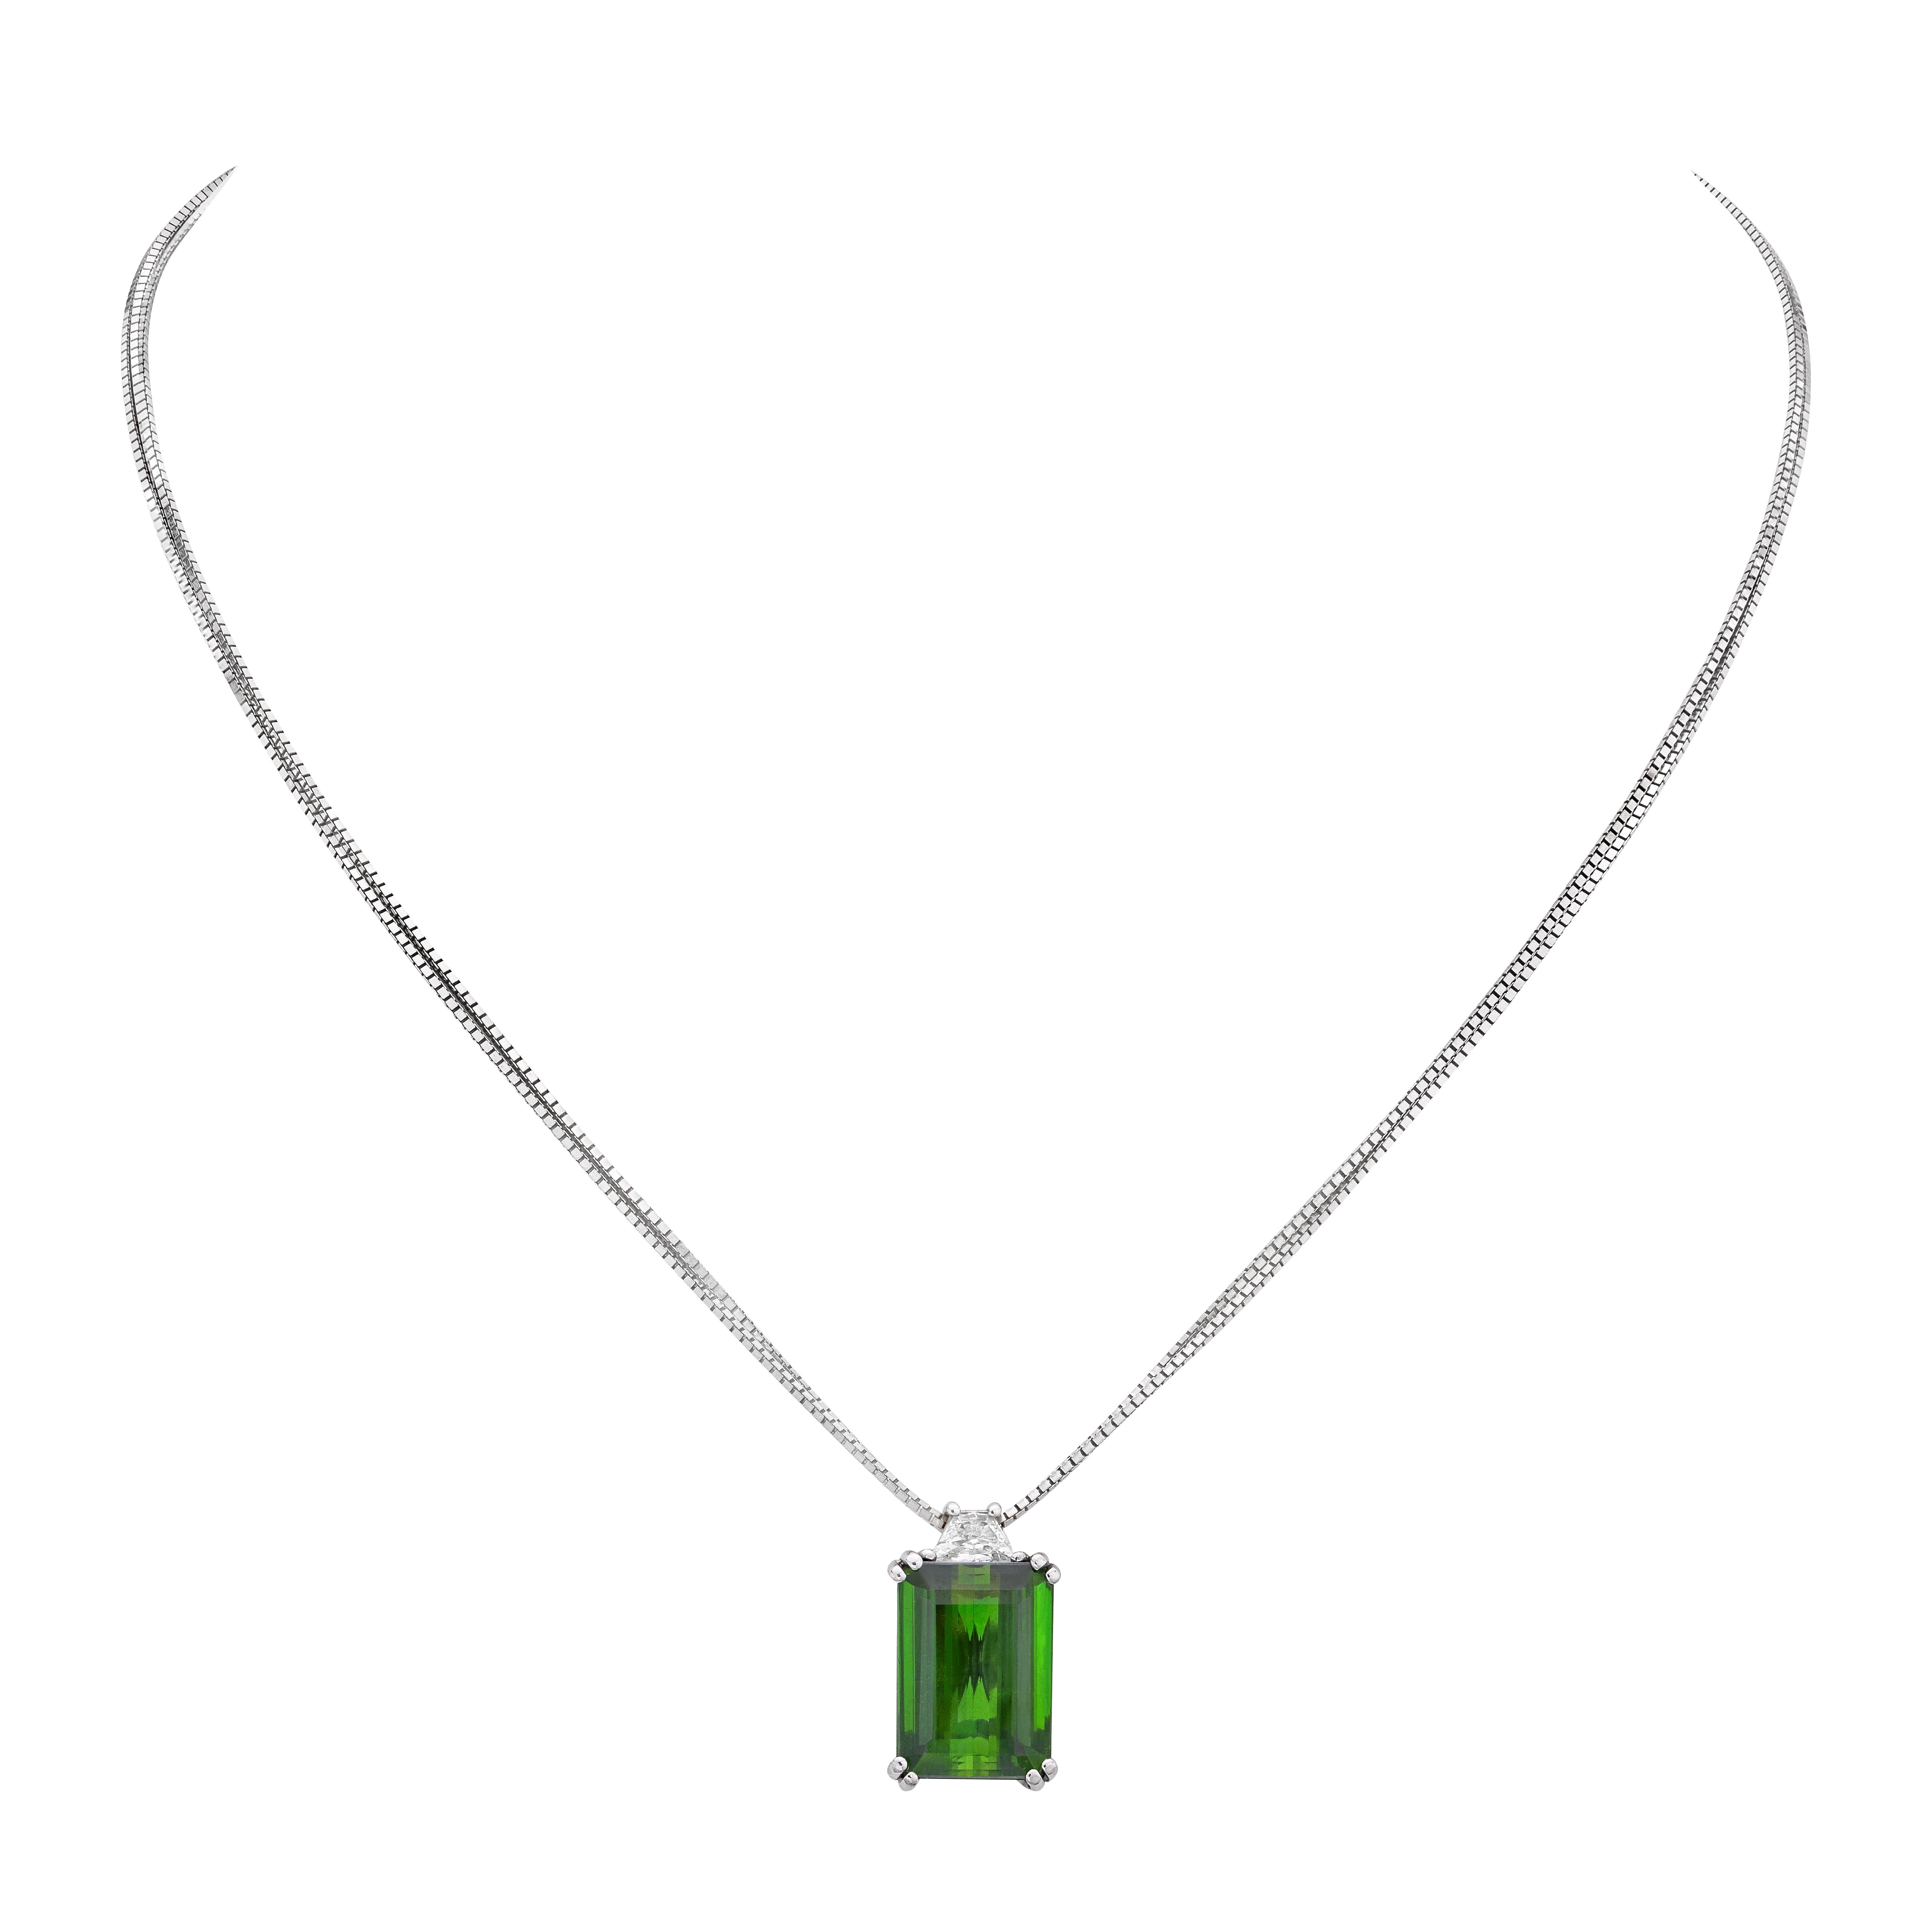 Gorgeous necklace, perfect for every day wear.  Designed and created alongside matching earrings and ring that can be found in separate listings.  

Necklace Details:

Emerald Cut Chrome Green Tourmaline (15.6 x 11.3 mm) weighing 11.58 Carats
    